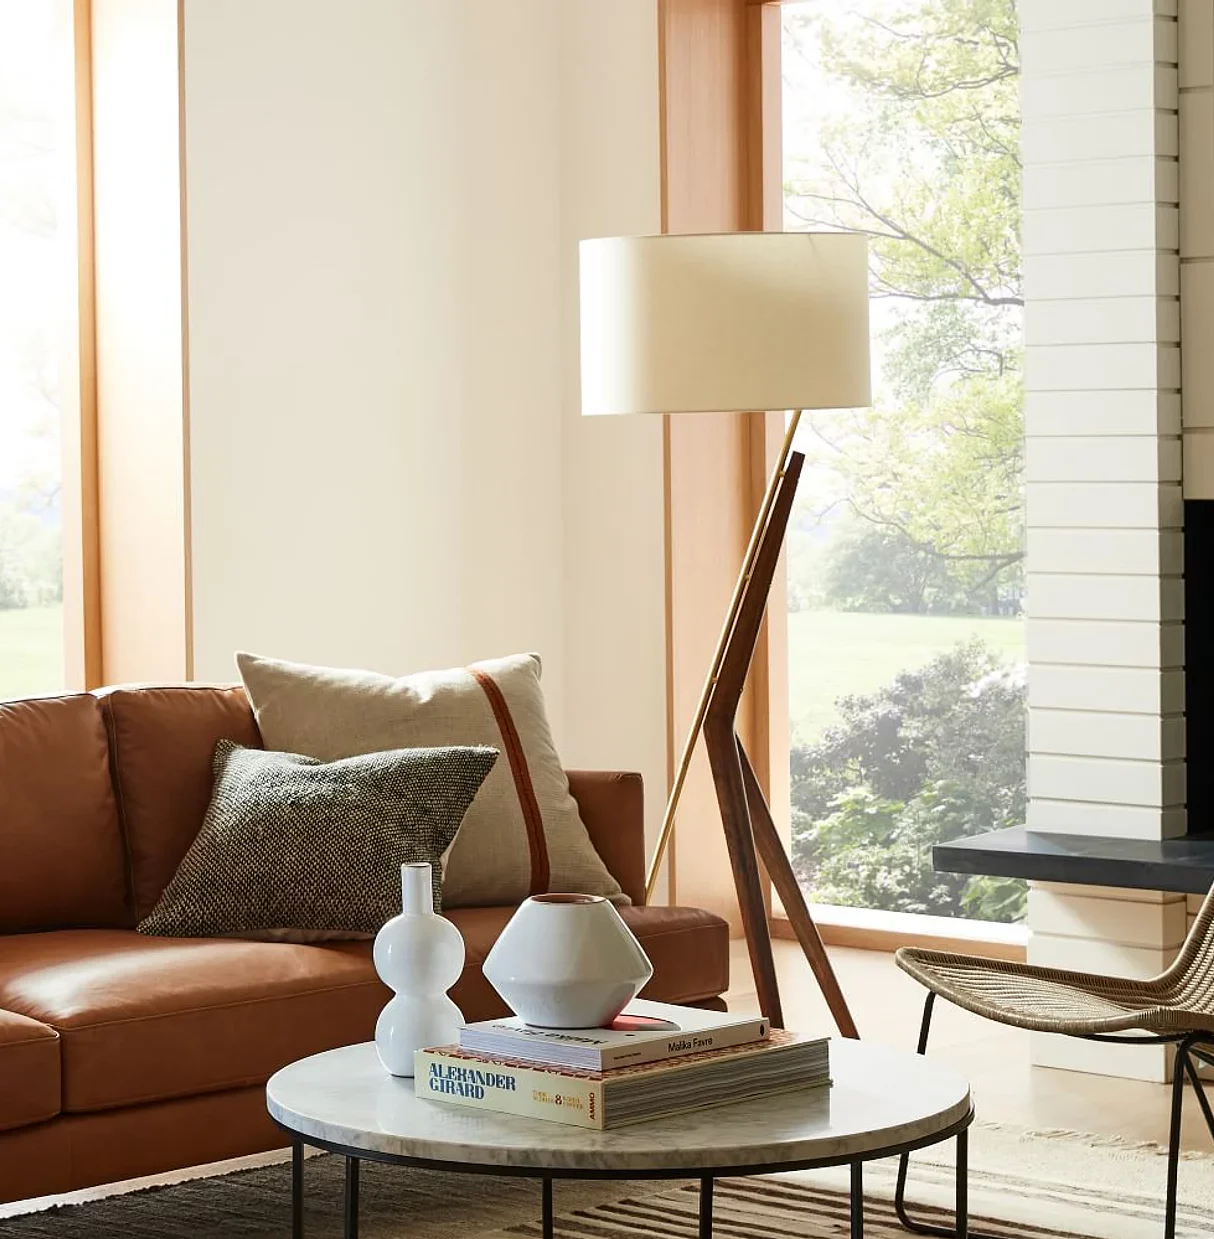 Brazilian mid-century floor lamp, elegant wooden base, placed near the living room sofa, coffee table placed in the middle, wooden flooring